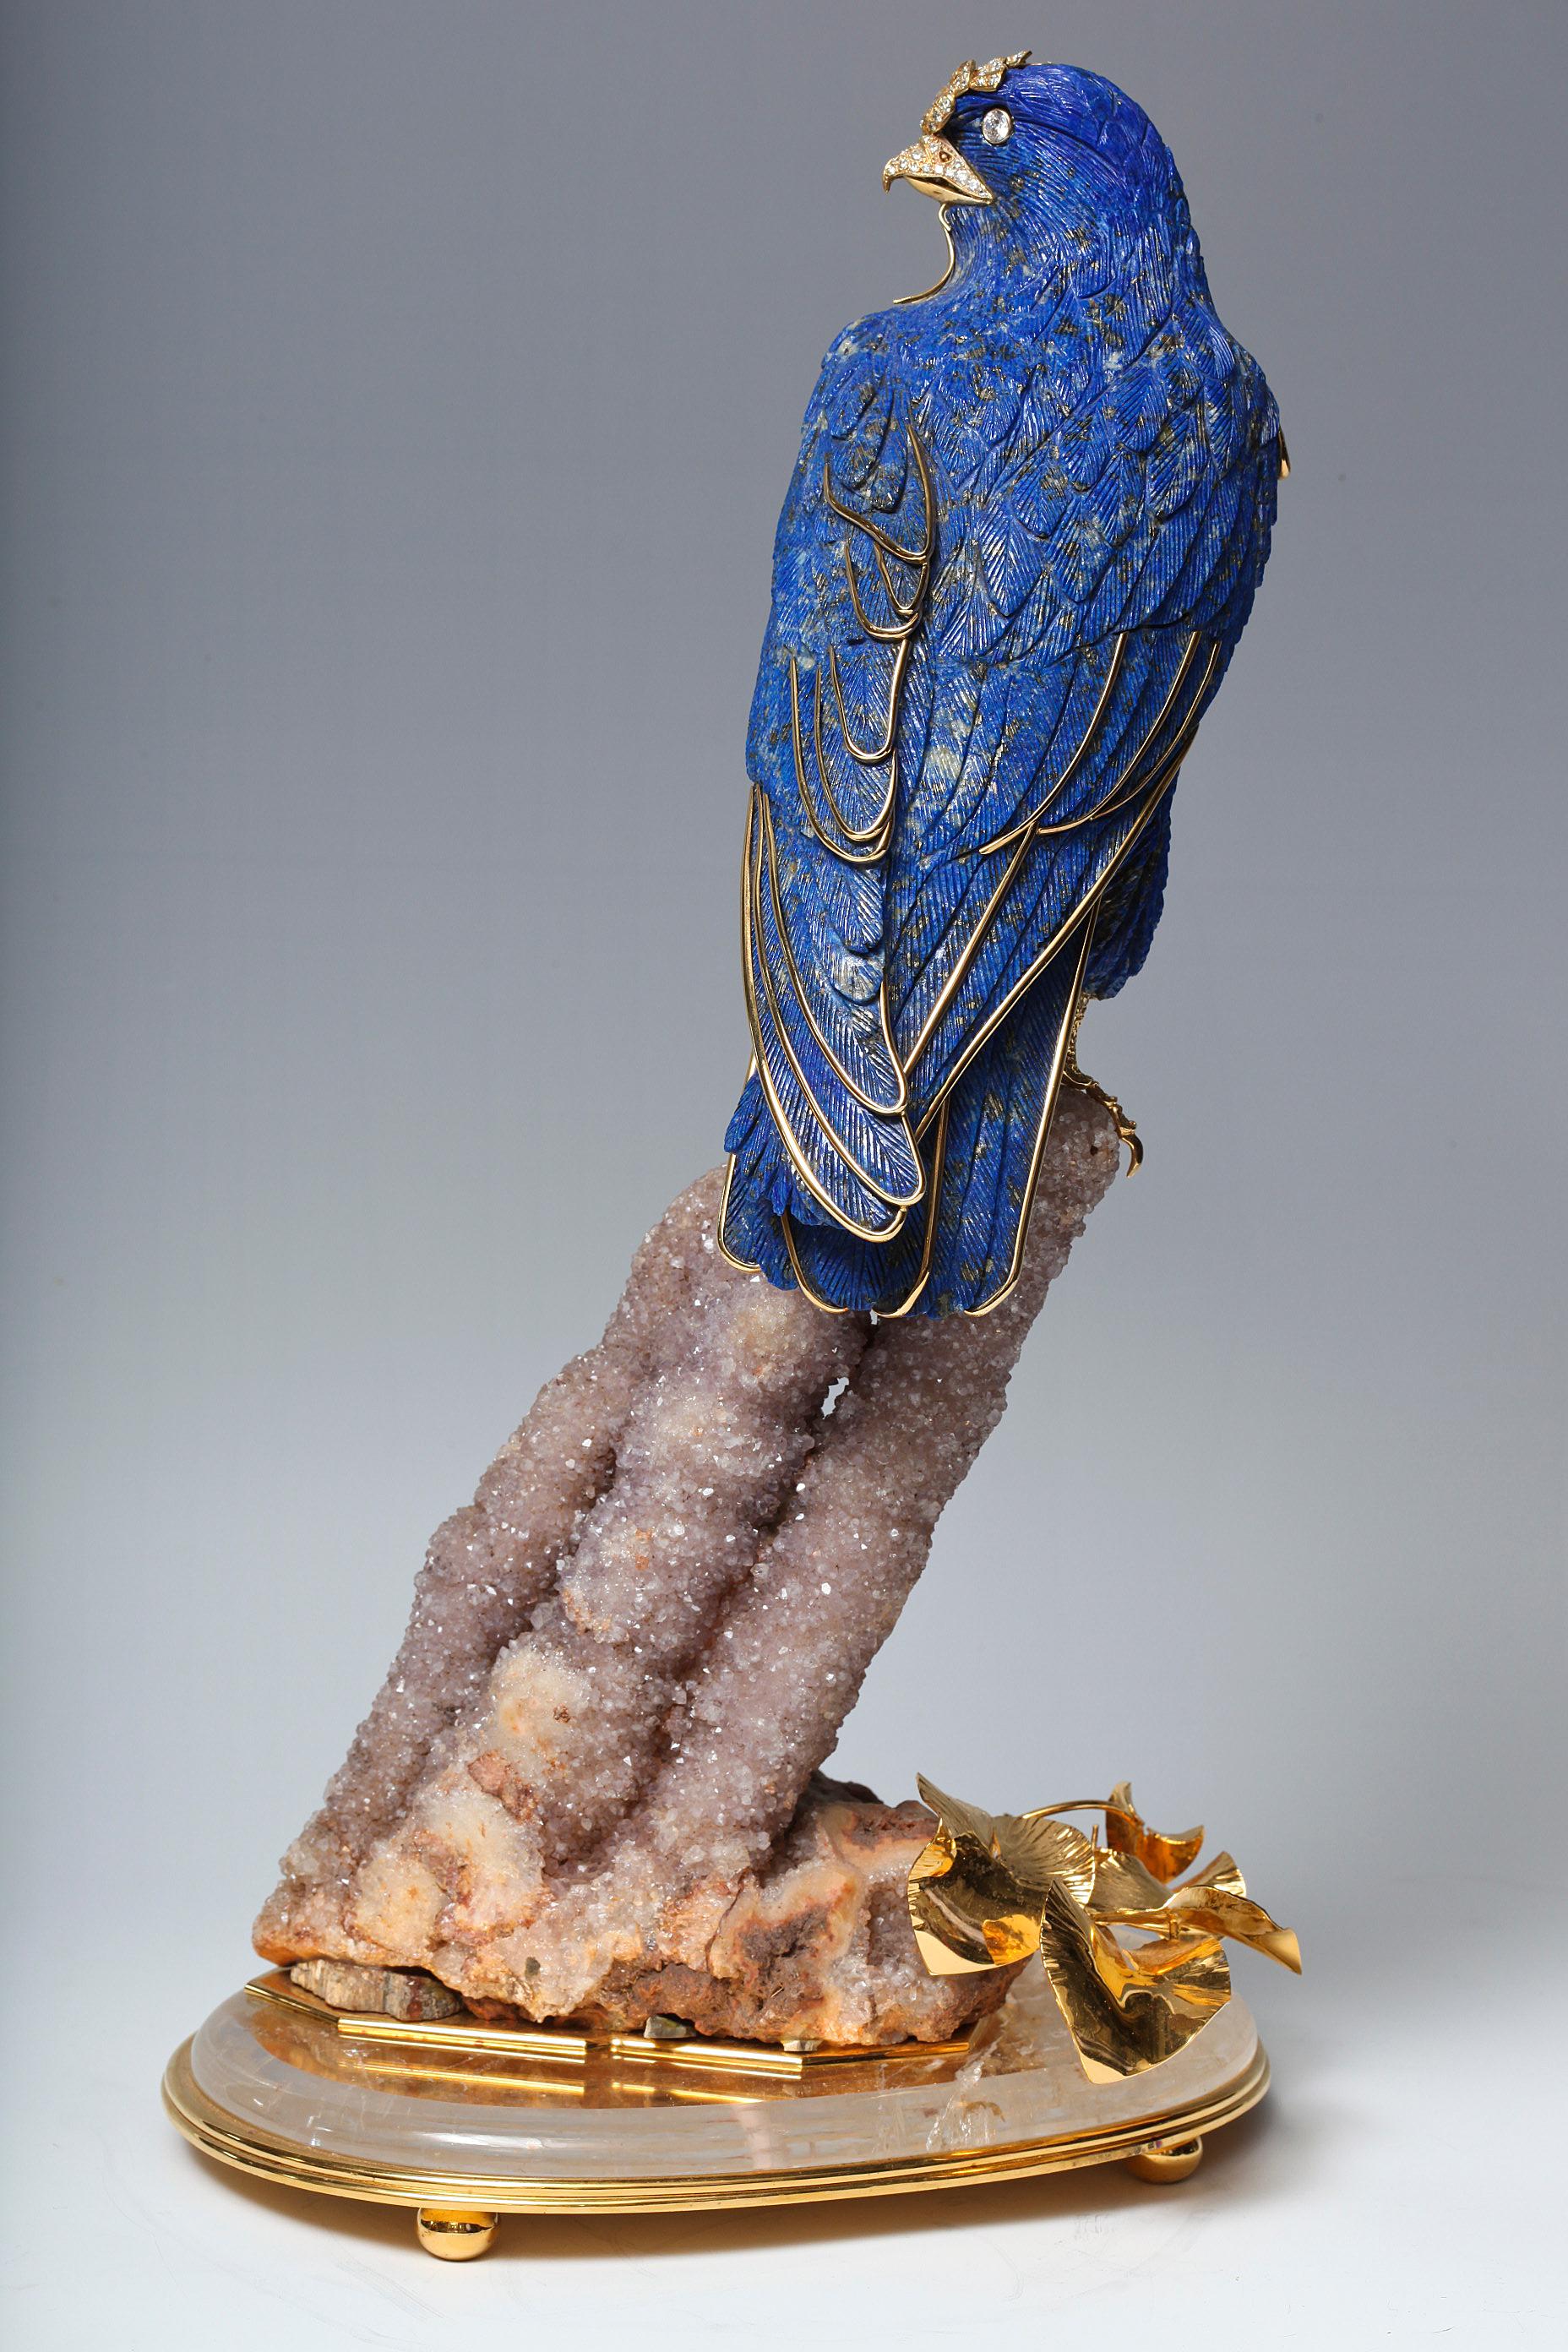 Other An Important Jeweled, Gold, Lapis Lazuli Falcon by Asprey & Co. London, Signed